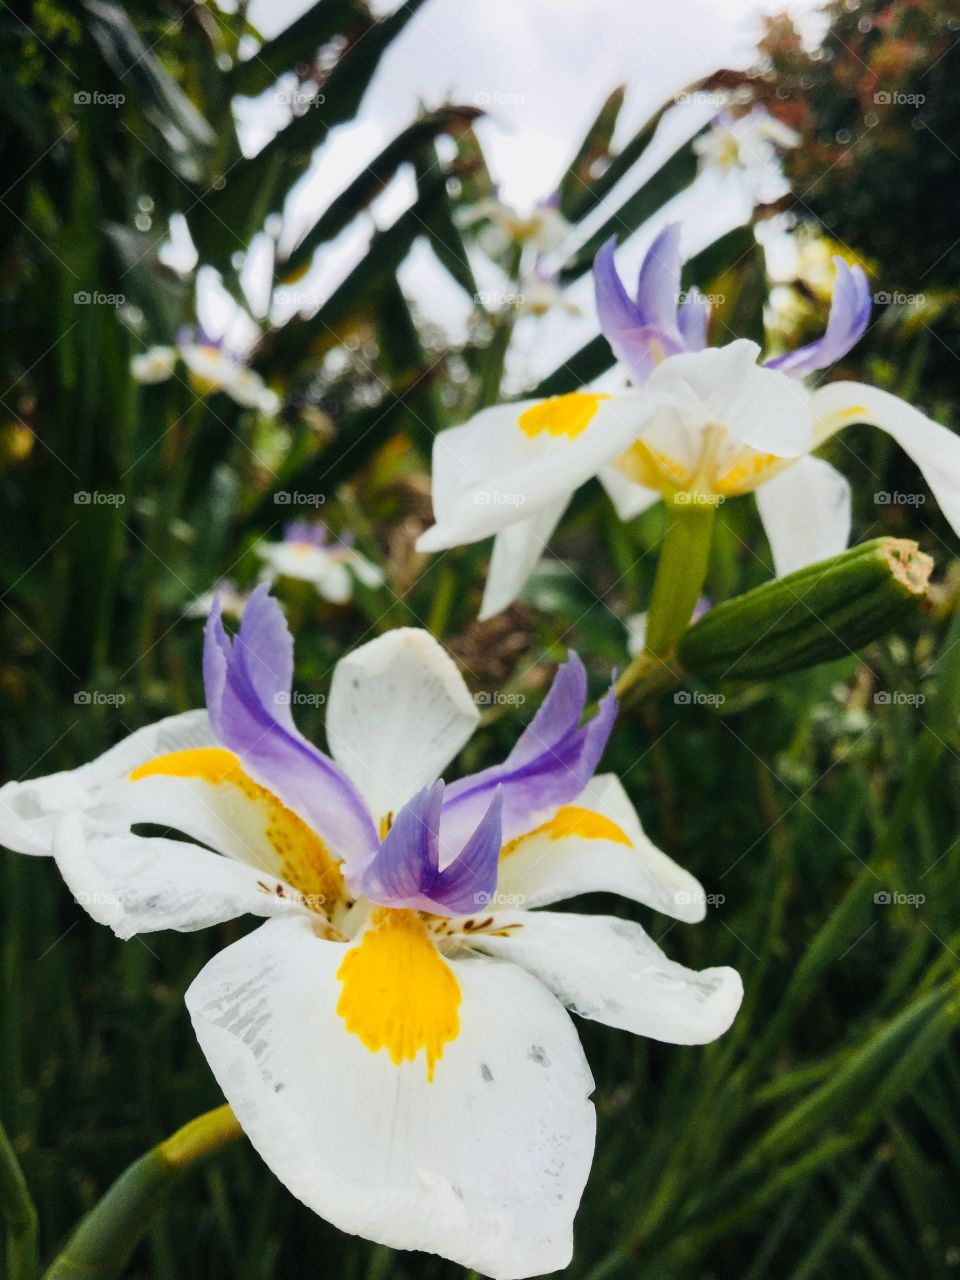 This is a photo that focuses on two flowers. The colours of the flowers are purple, yellow and white. 